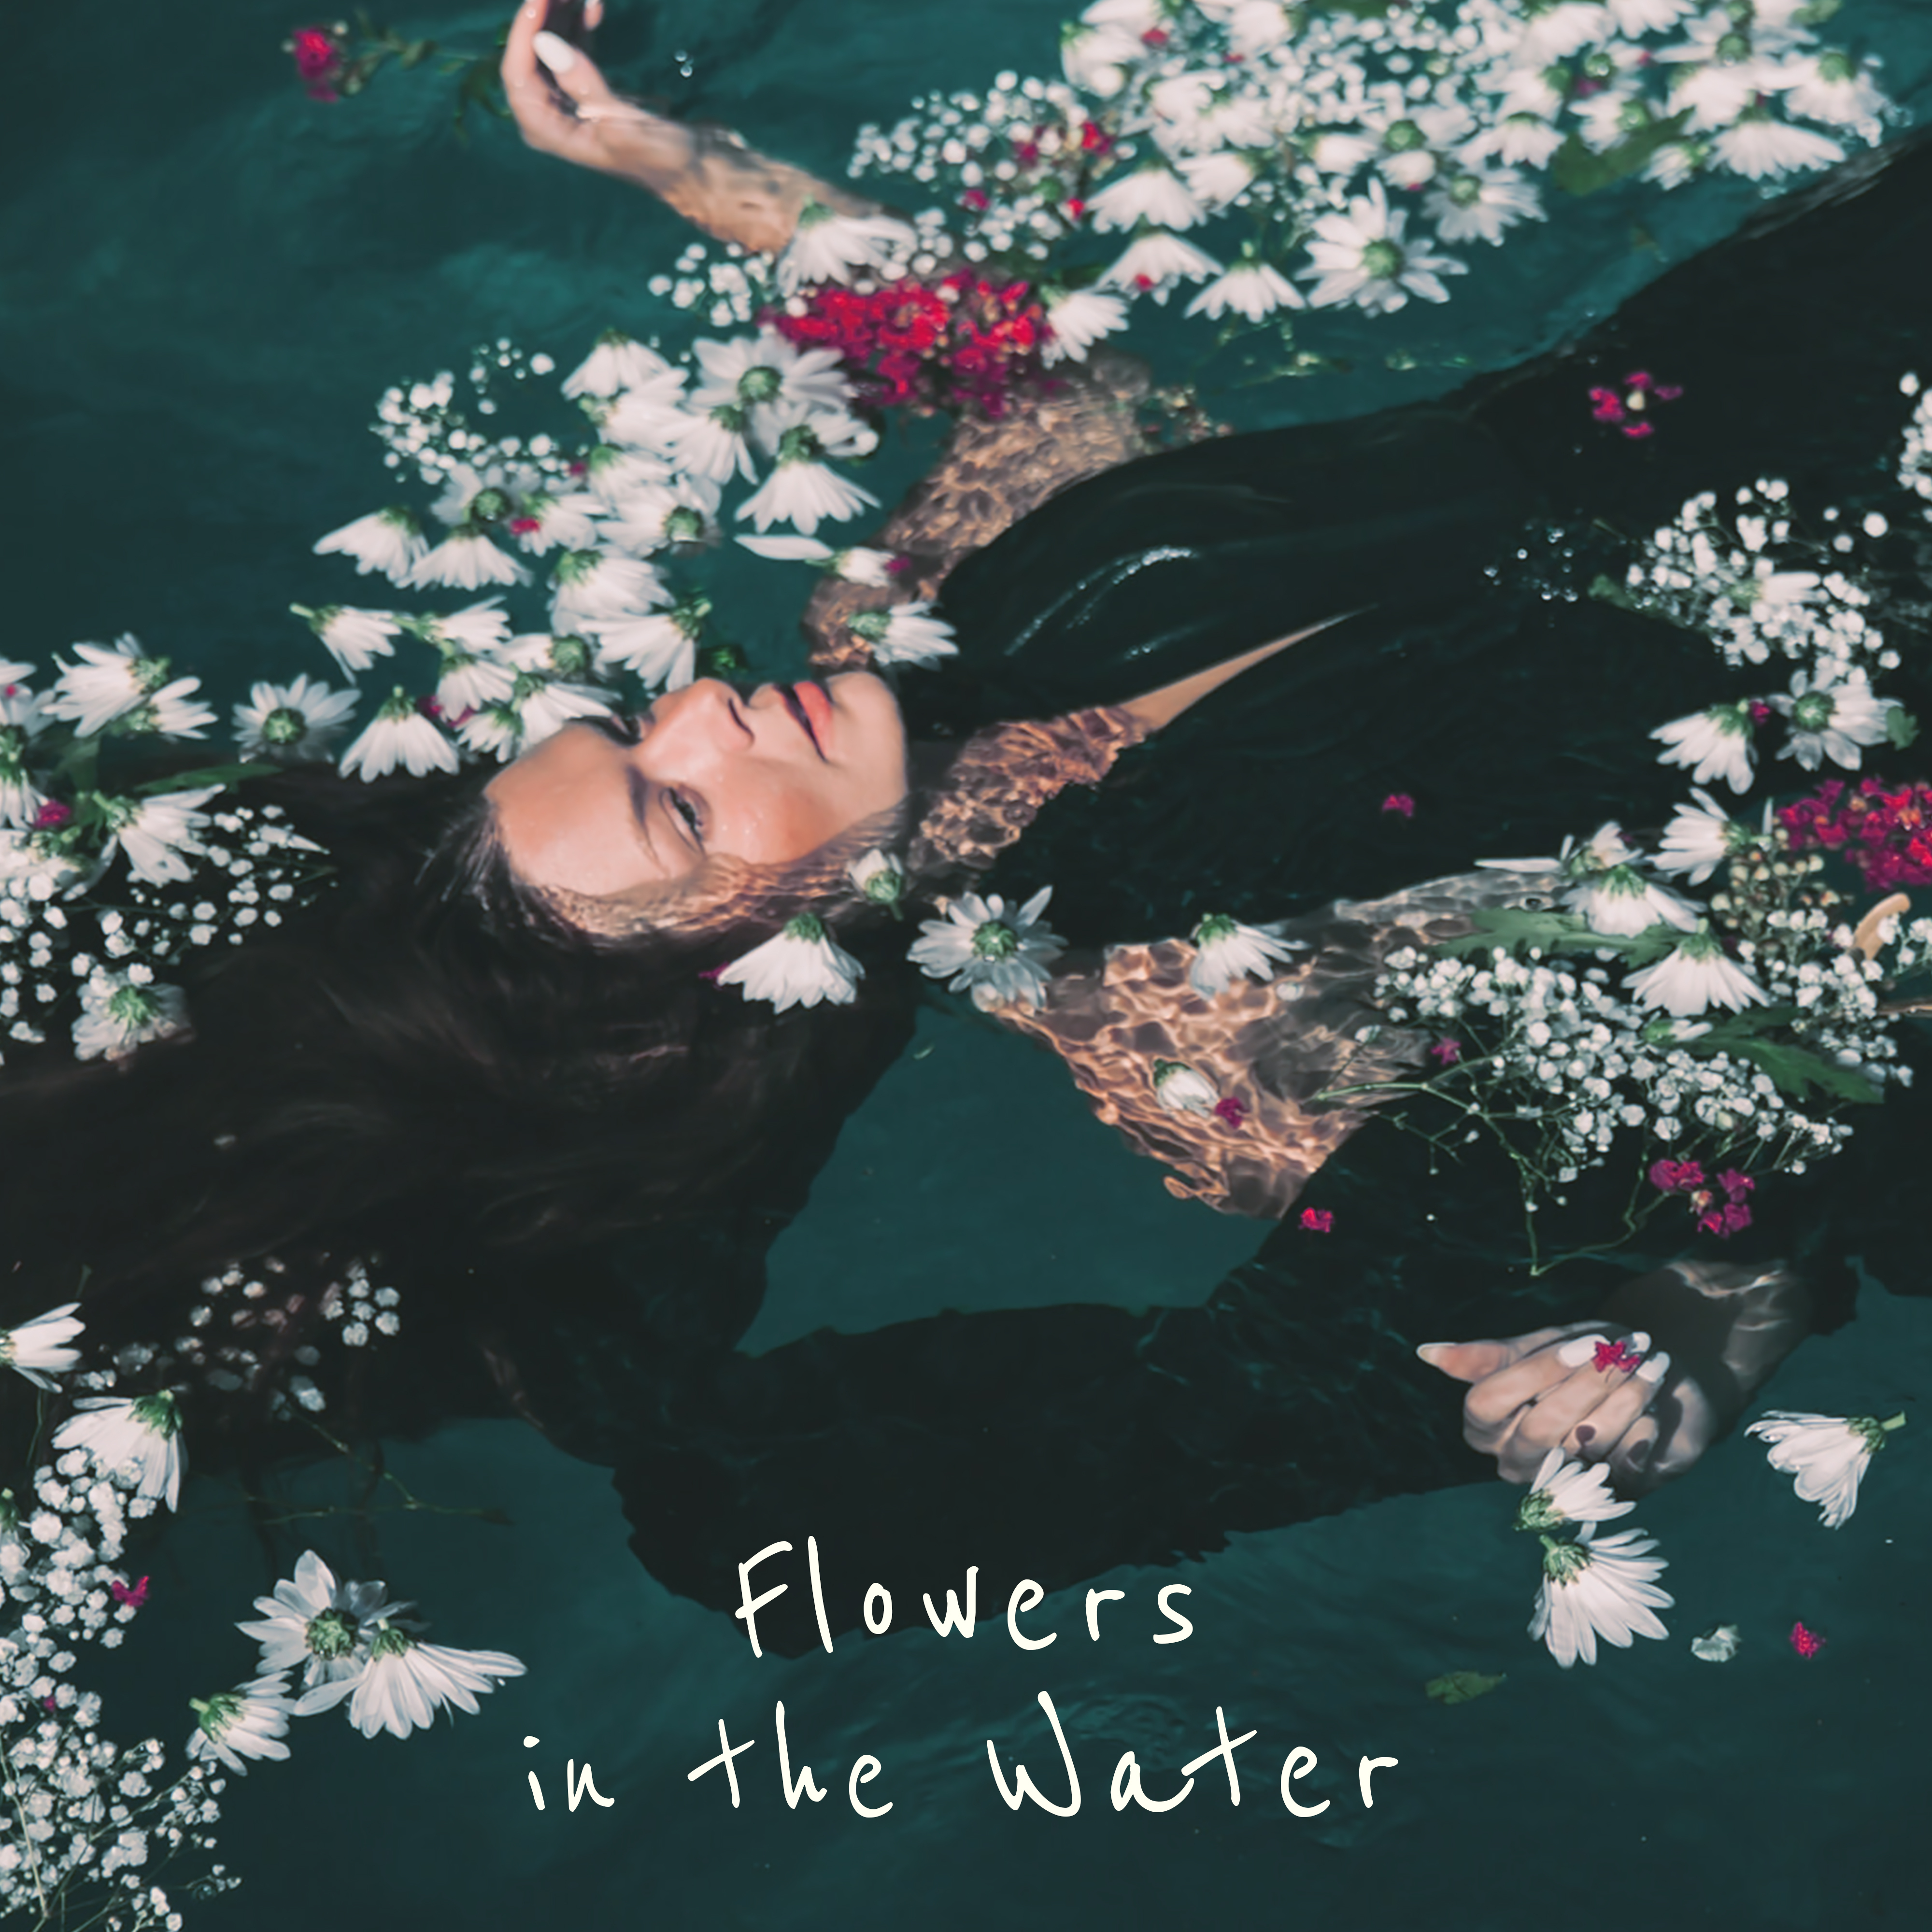 Flowers in the Water – Relax, restar, Calming, Rippel, Among Nature, With Joy